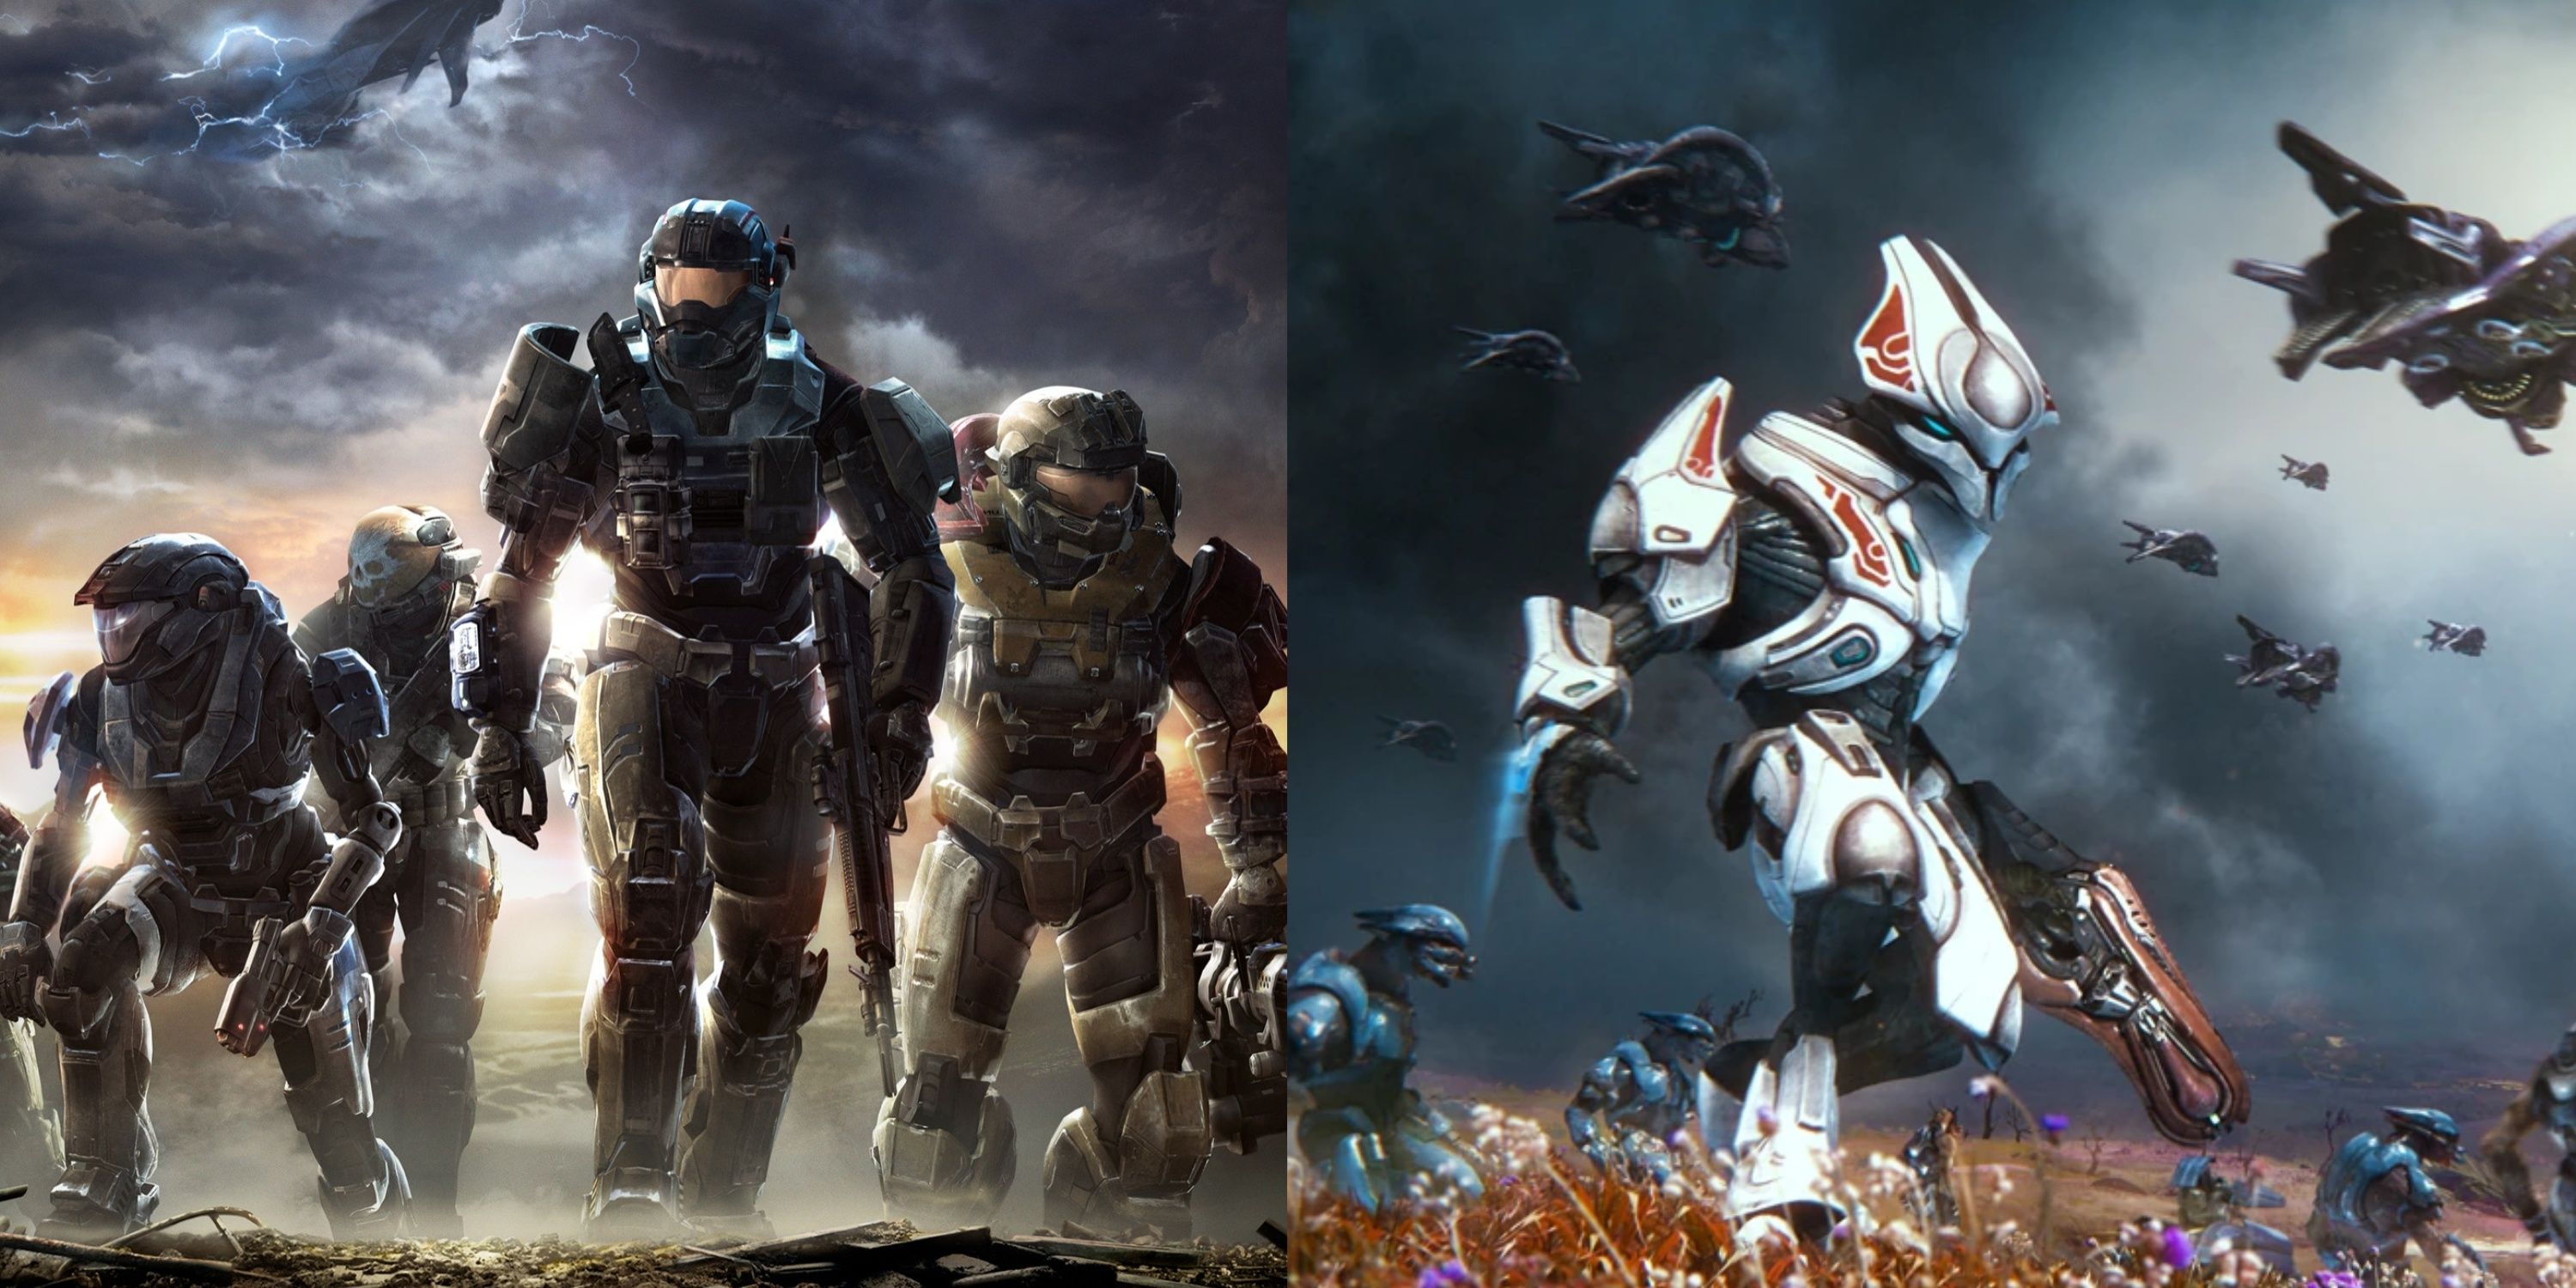 Noble Team and an army of Covenant during the events of Halo: Reach